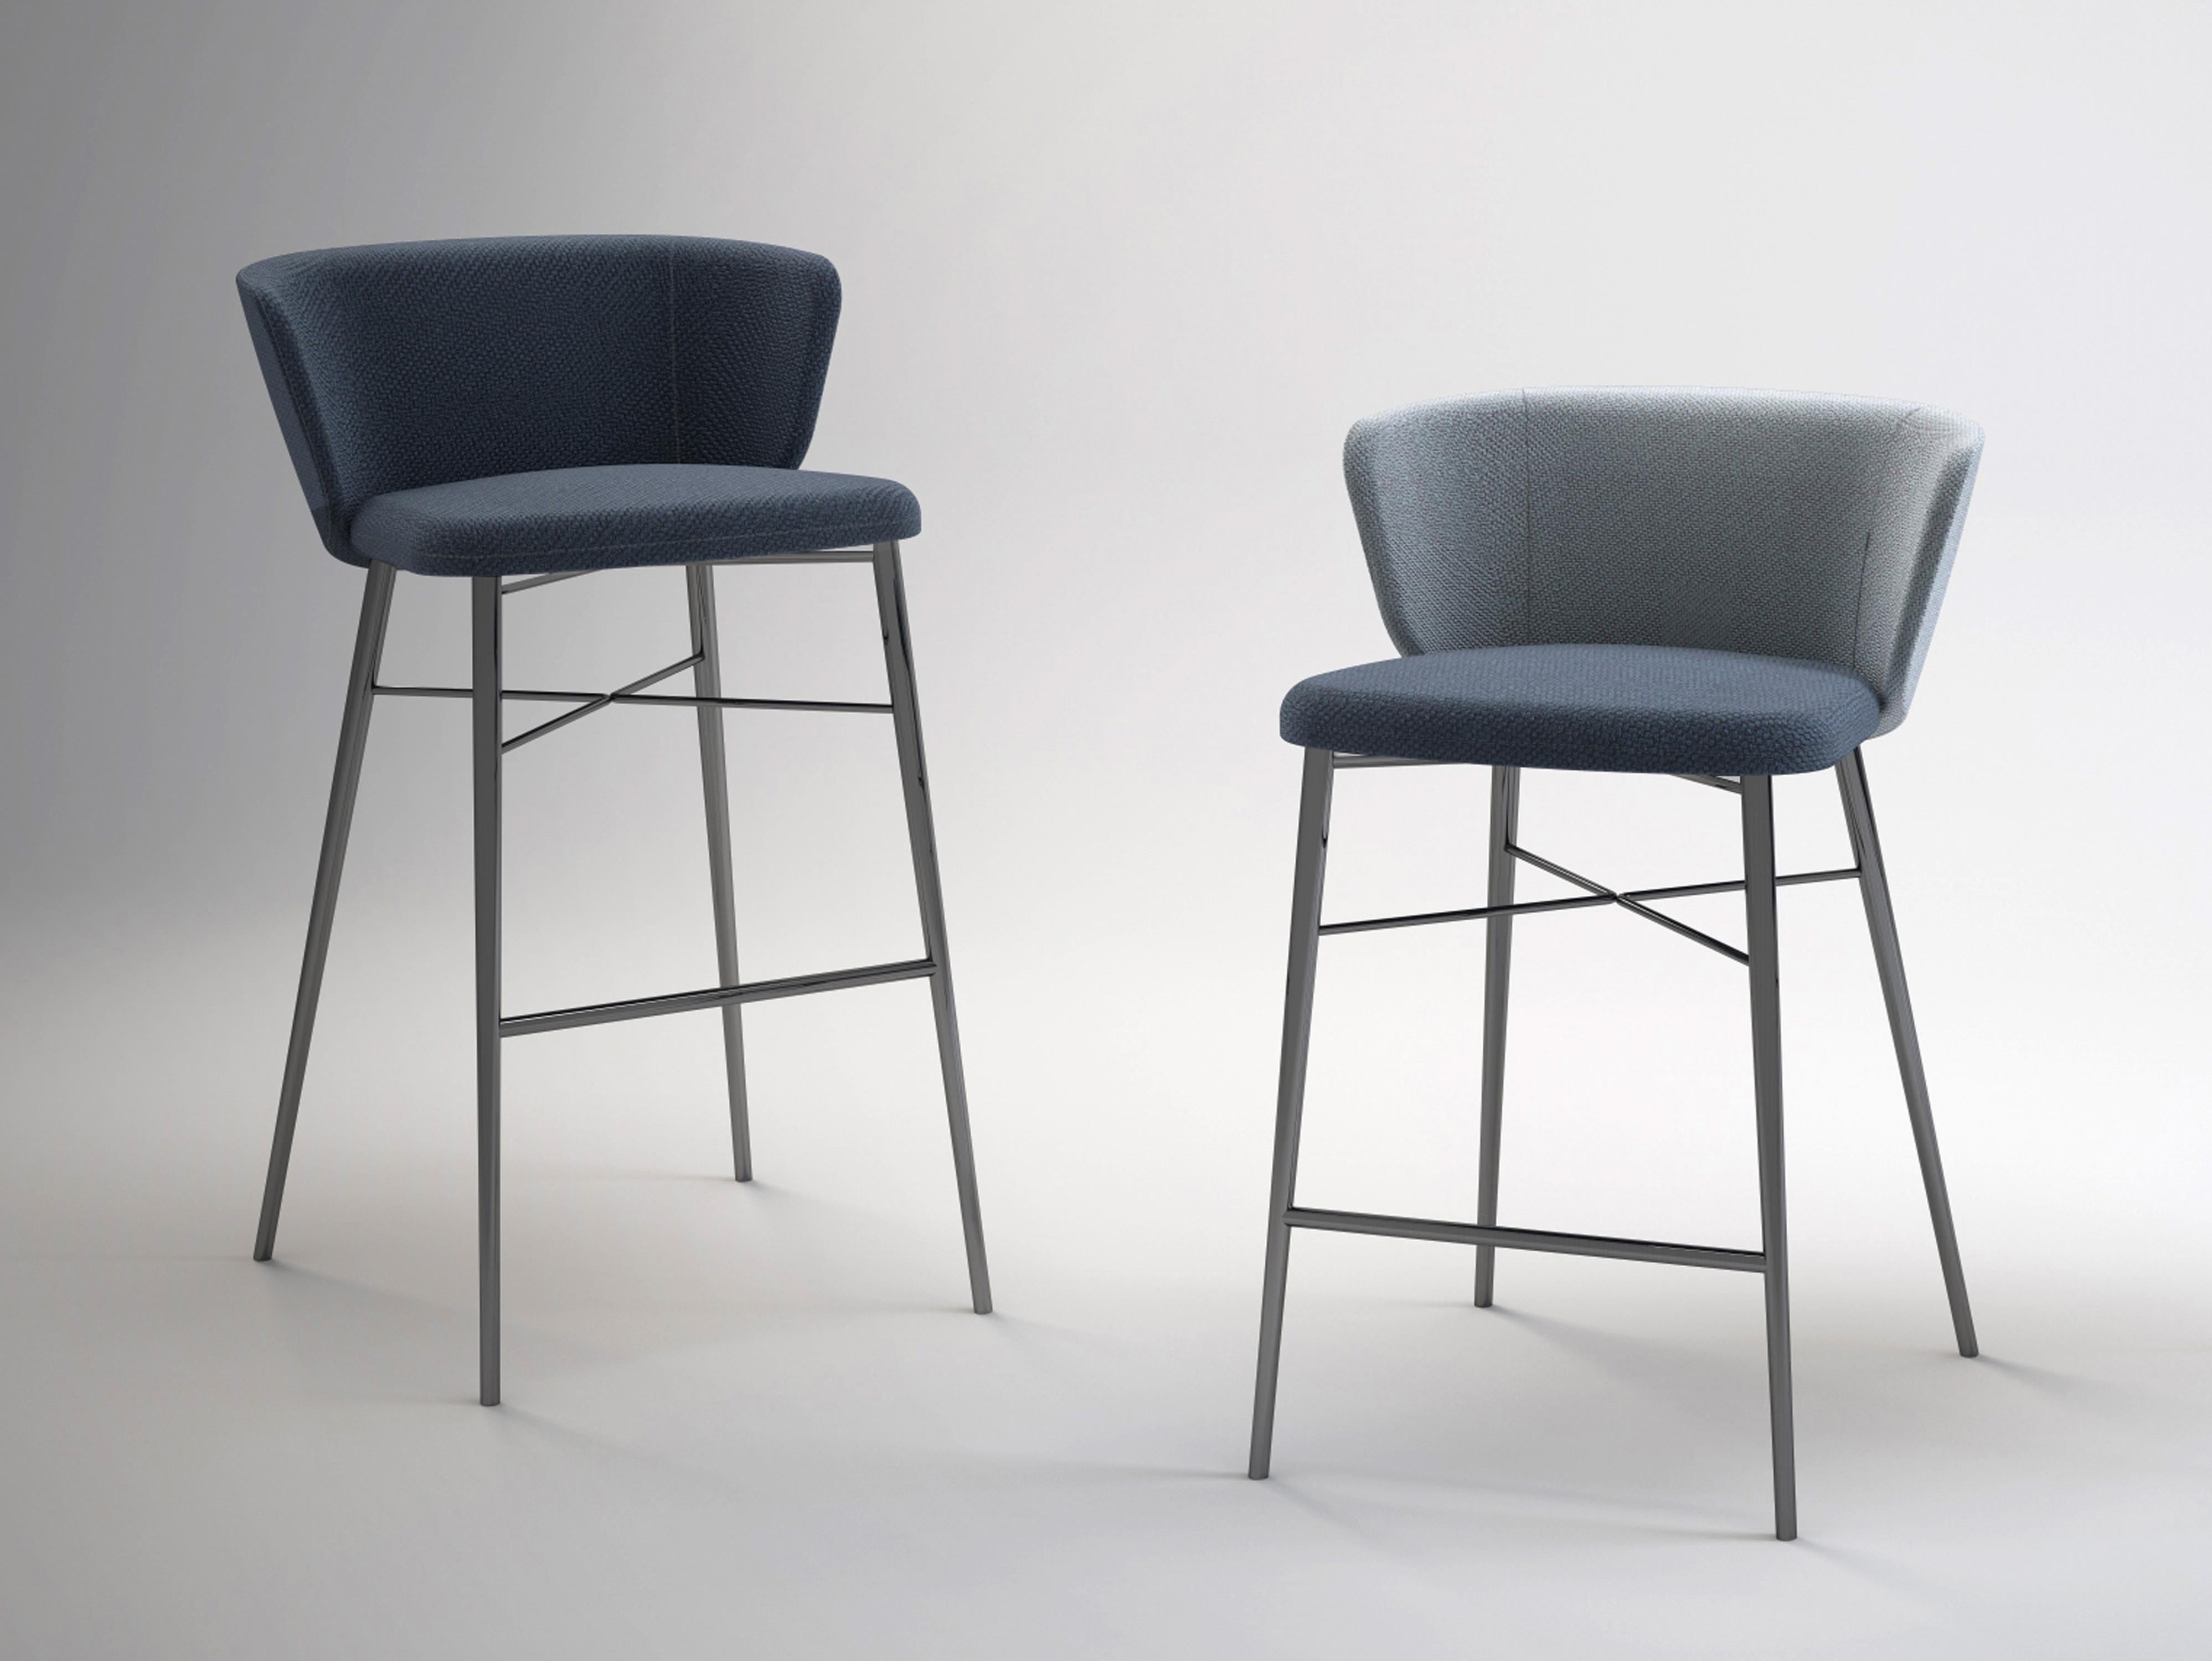 Available in a range of colors and fabric options, the Kin padded bar stools have a structure made of steel tubes finished in a light grey or anthracite grey epoxy powder coat or black chrome. 
Flexible polyurethane backrest, processed without CFC.